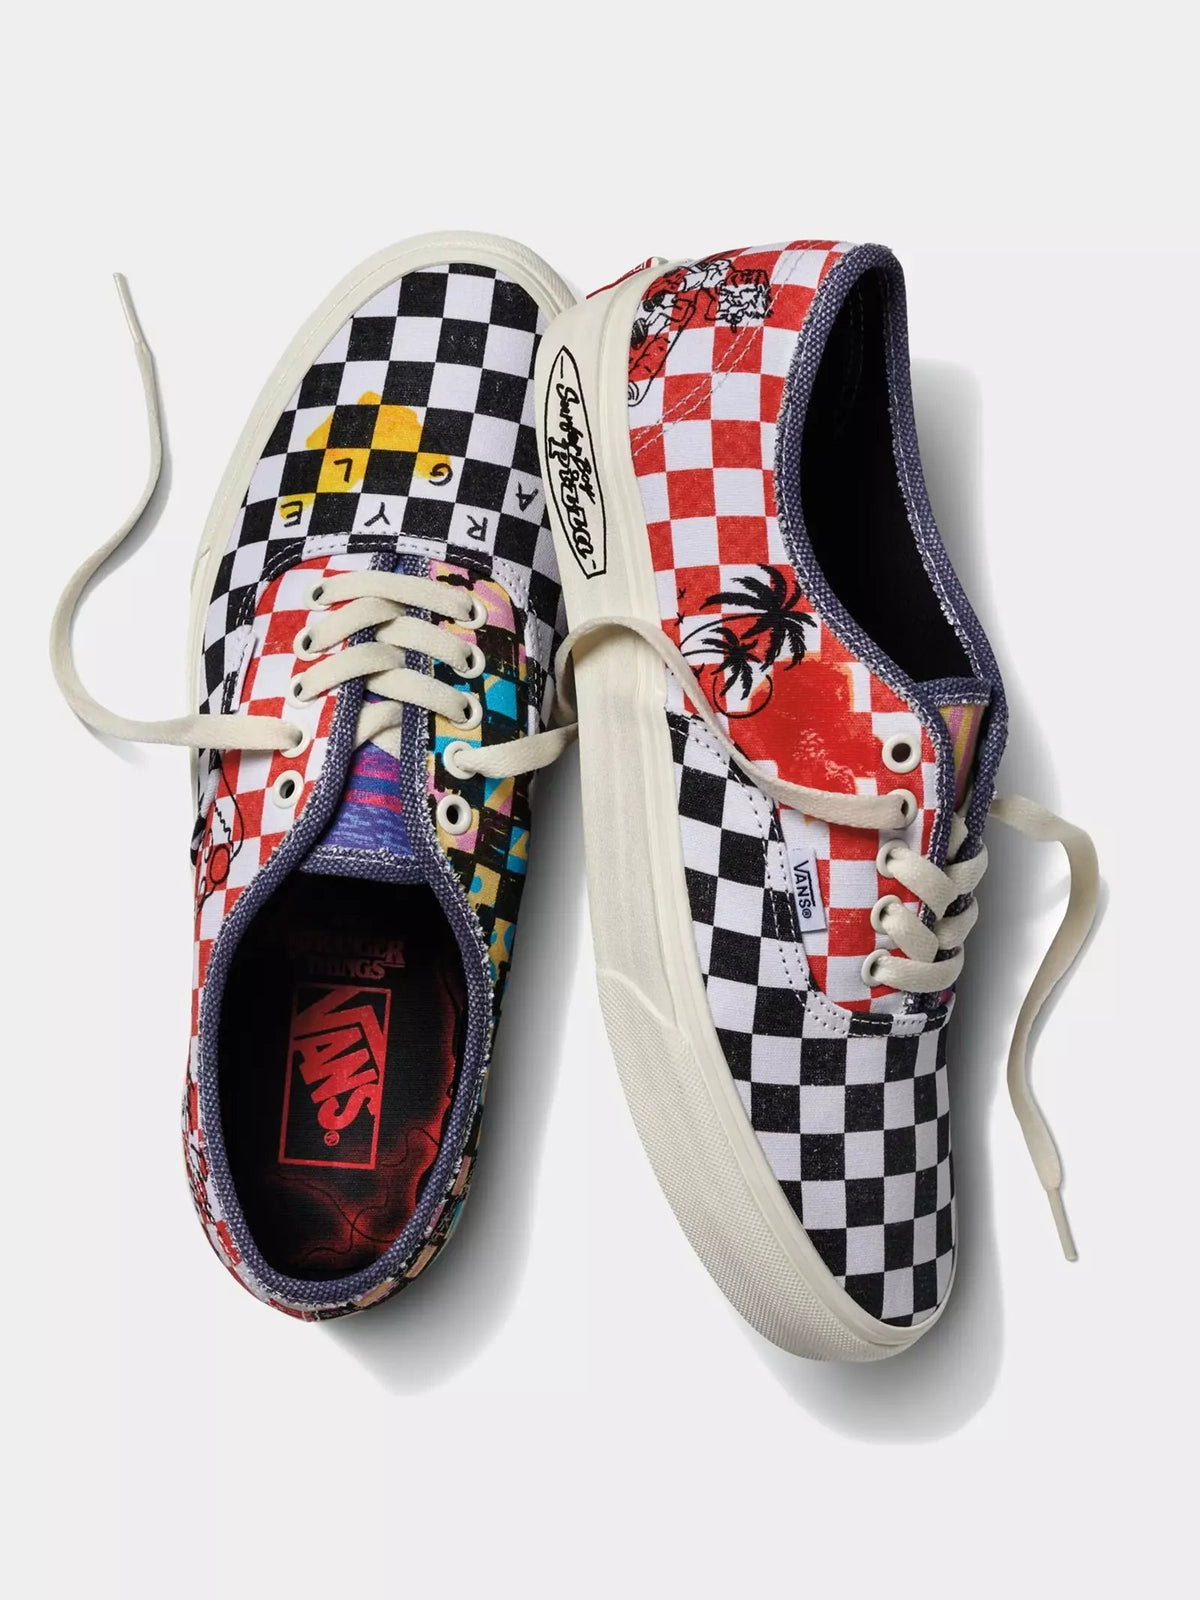 Unisex Stranger Things Authentic Sneakers in Black &amp; Red Checkerboard